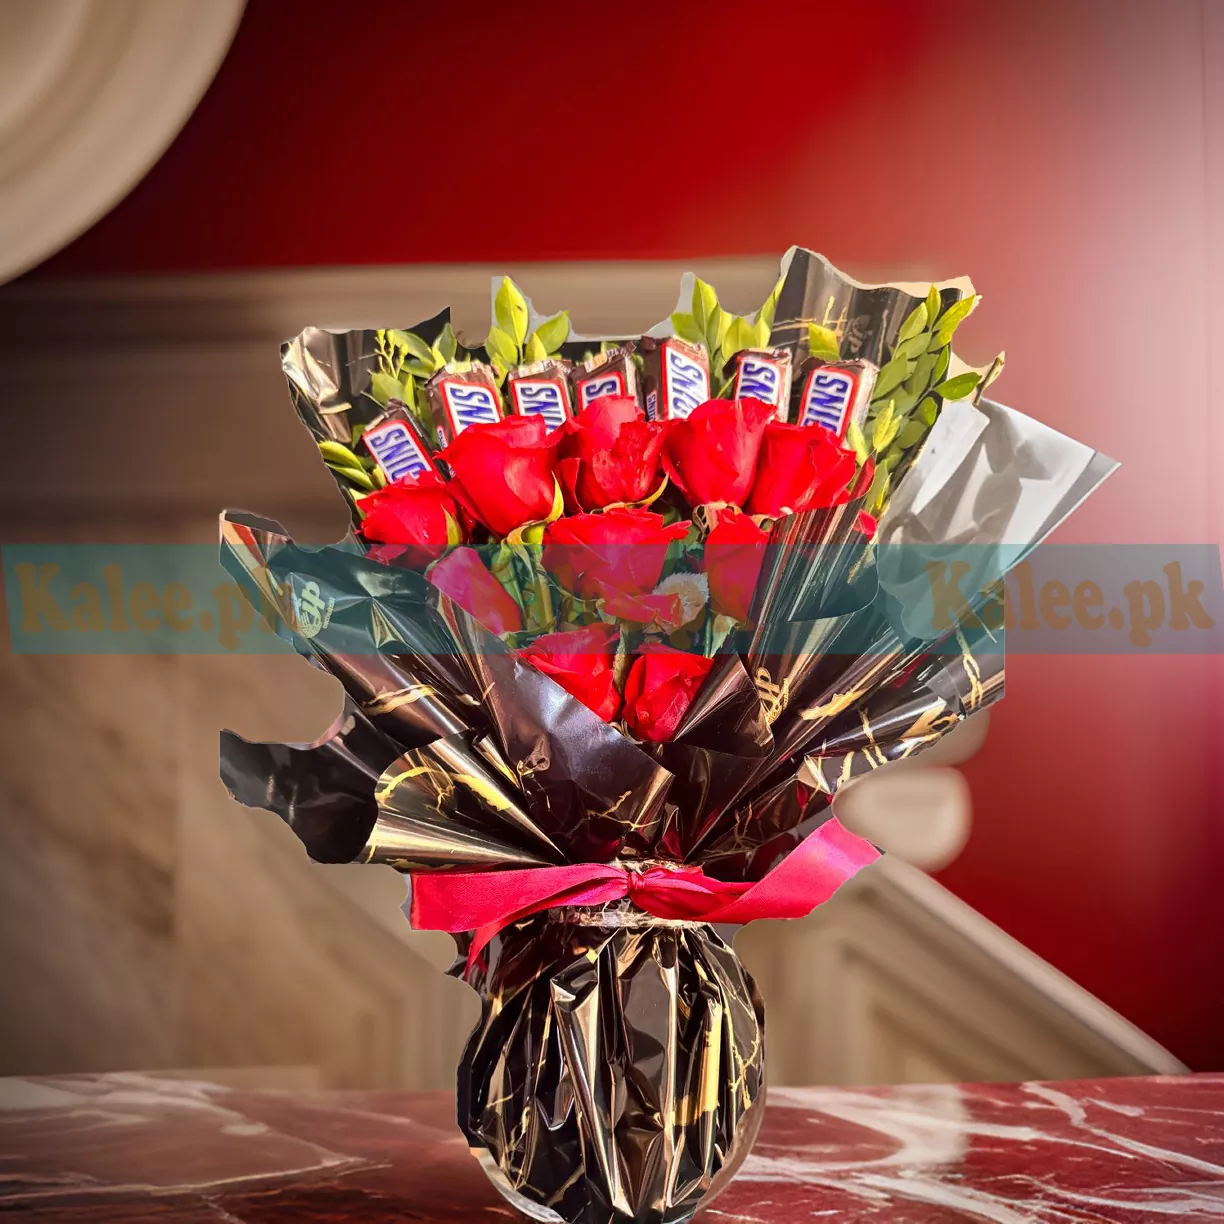 Crimson Temptation Chocolates Bouquet with Red Rose Flowers